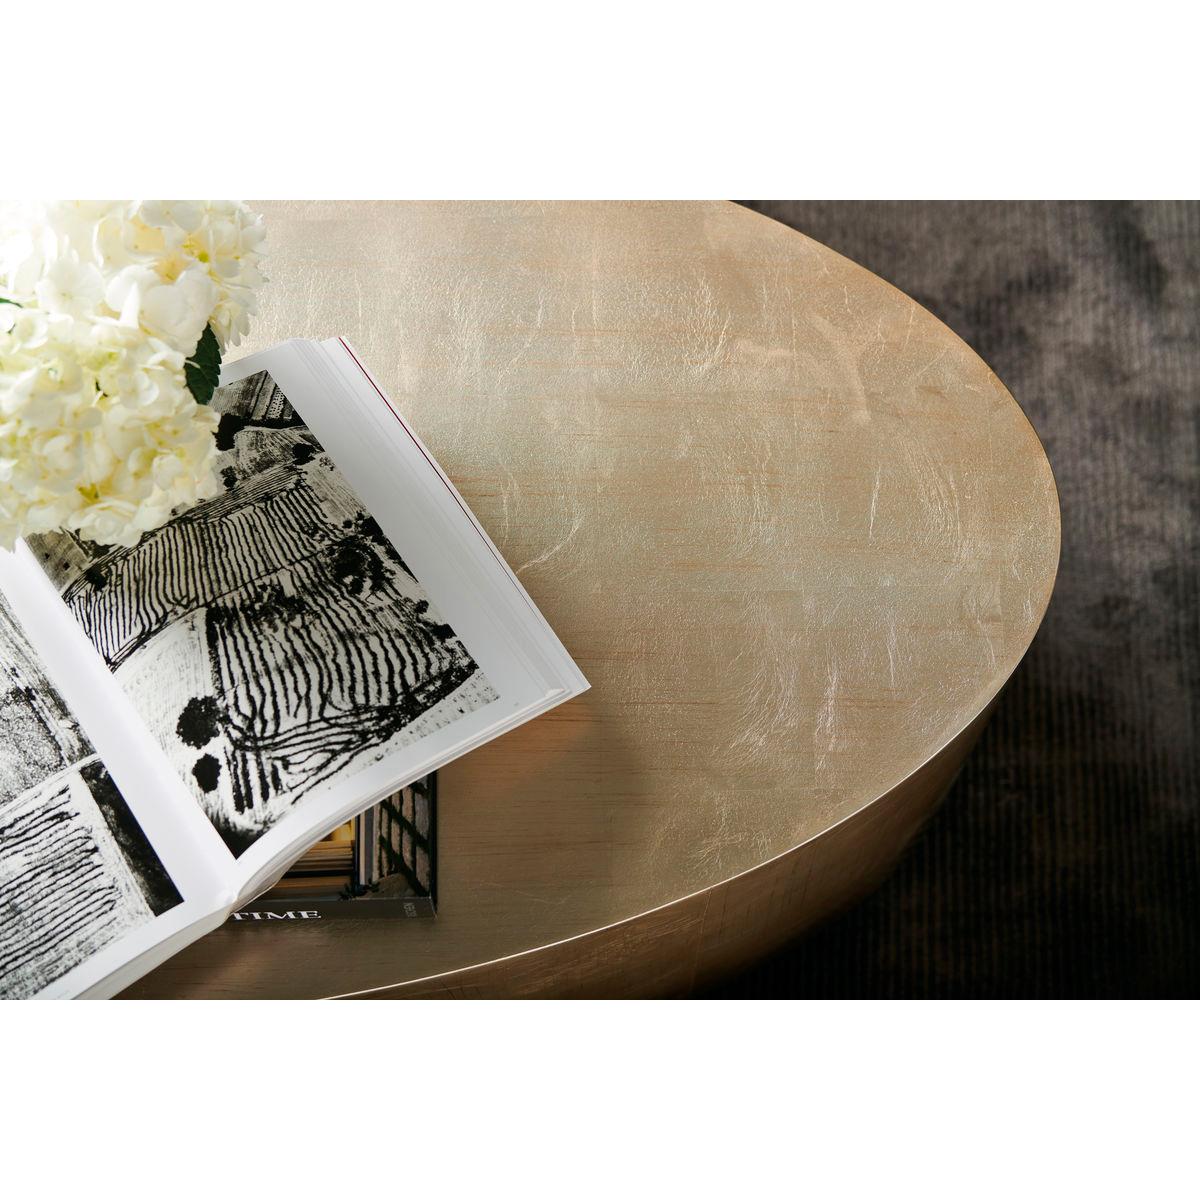 Not only does the oval shape encourage easy movement and flow around a seating area, this clever cocktail table adds such sparkle to a room.

Finished in a popular silver and gold leaf finish, and complemented by a rich Charcoal-finished base. A